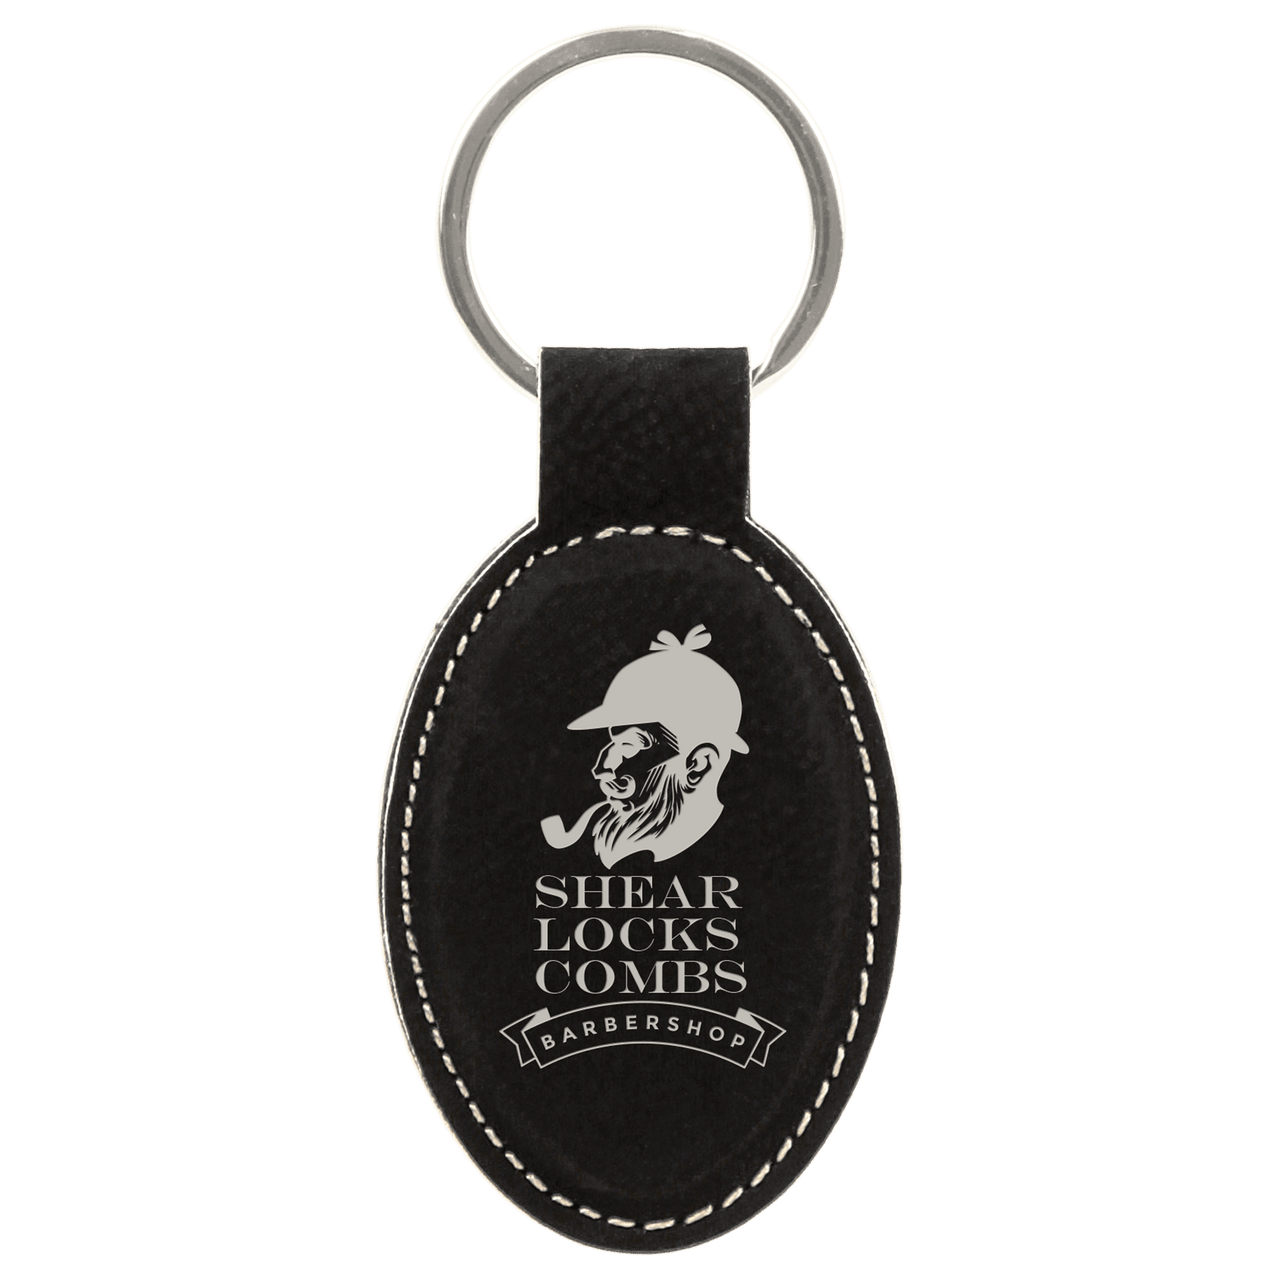 RCH Gifts Personalized Leather Keychain, Leather Keychain Engraved, Engraved keychain/Laser Engraved Gray / M2 / 2 Sides